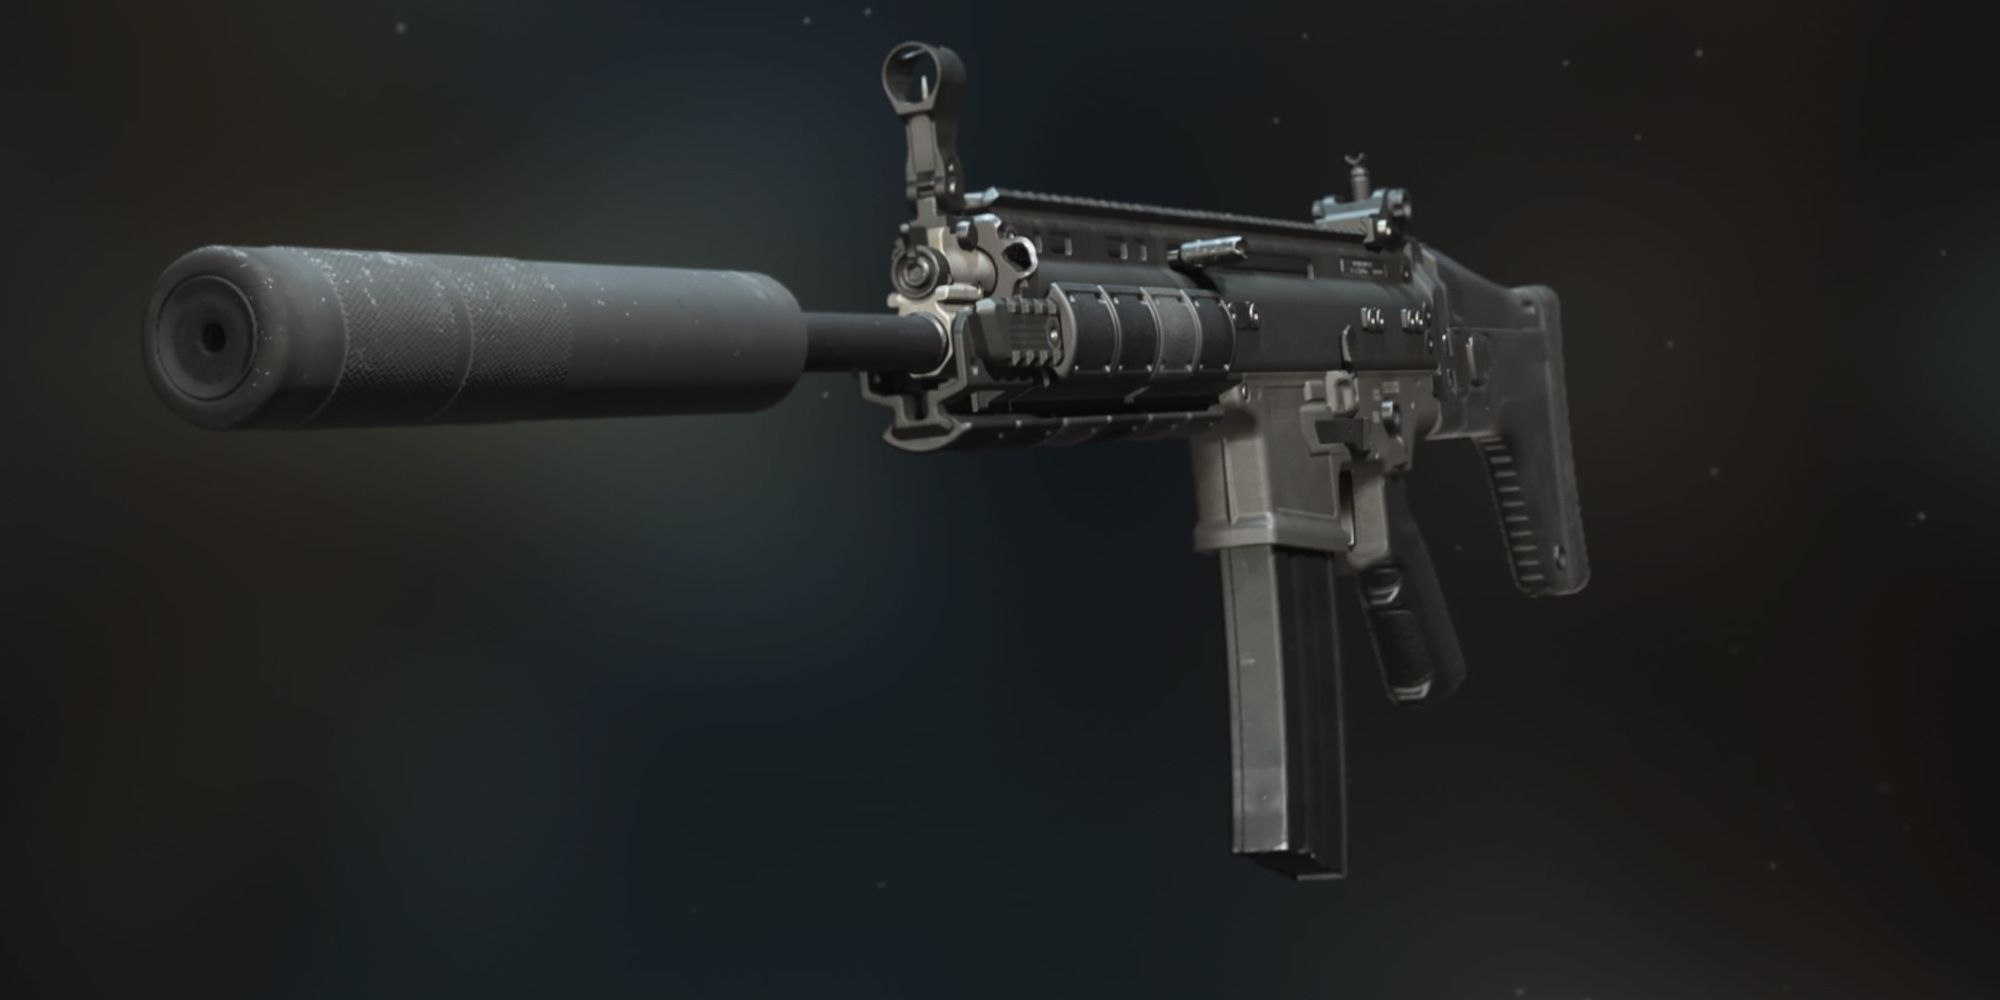 The Echoless-80 attachment extends from the TAQ-56 muzzle at COD:MW2.